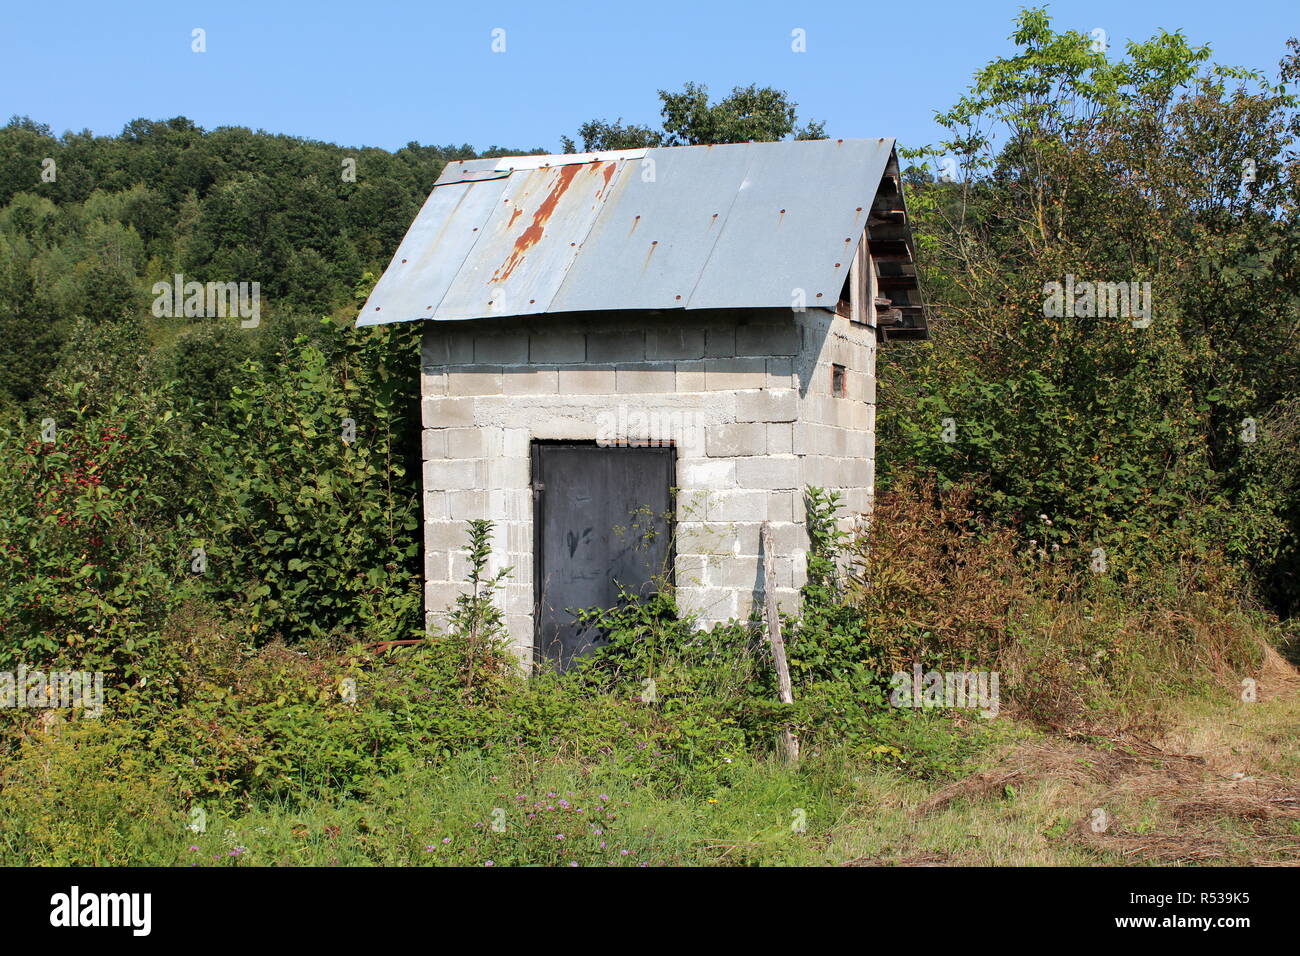 Outdoor garden tool shed made of large concrete building blocks with metal doors and roof surrounded with overgrown plants and forest vegetation Stock Photo